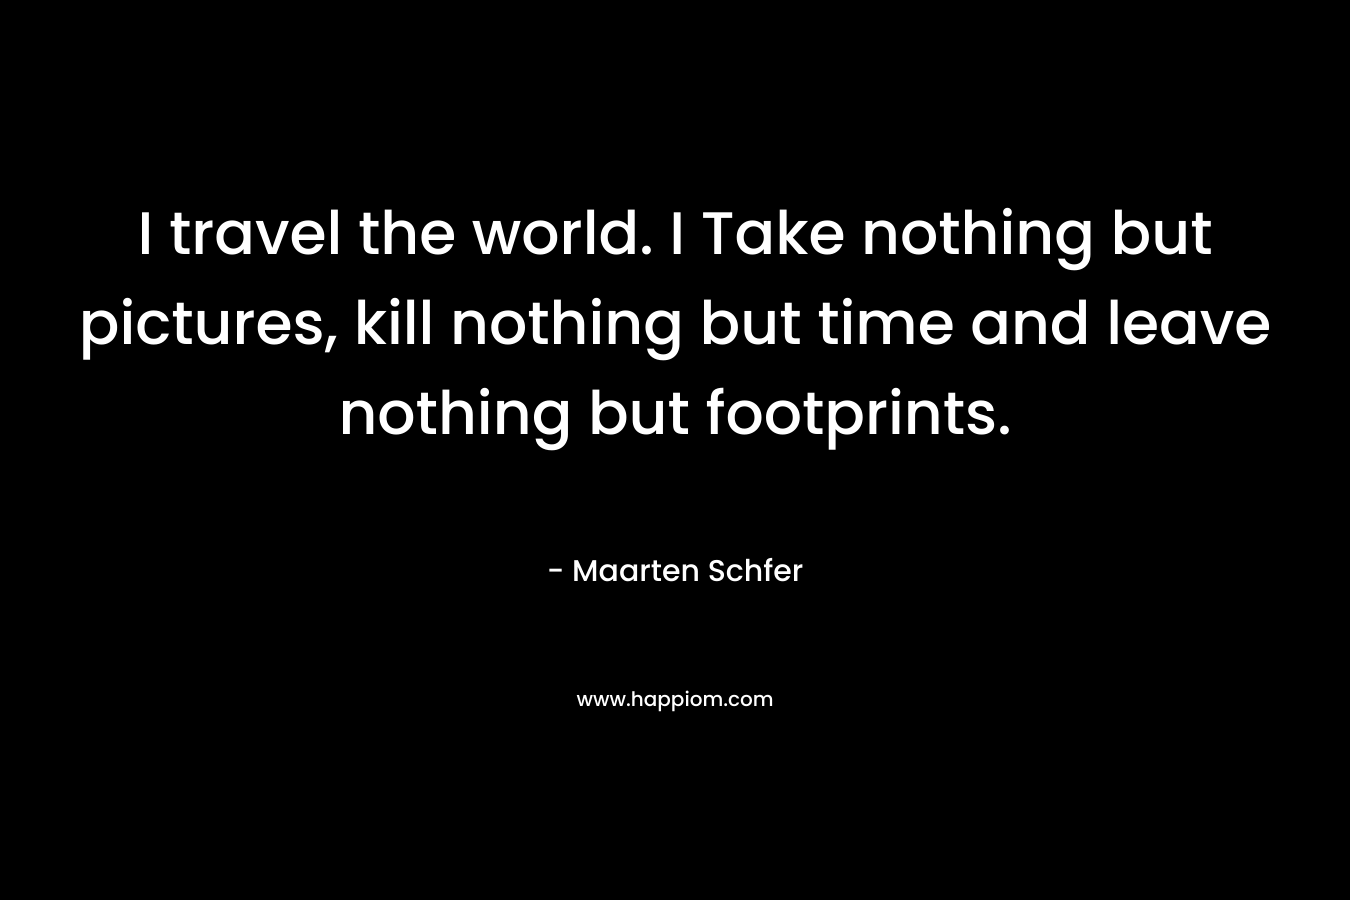 I travel the world. I Take nothing but pictures, kill nothing but time and leave nothing but footprints. – Maarten Schfer